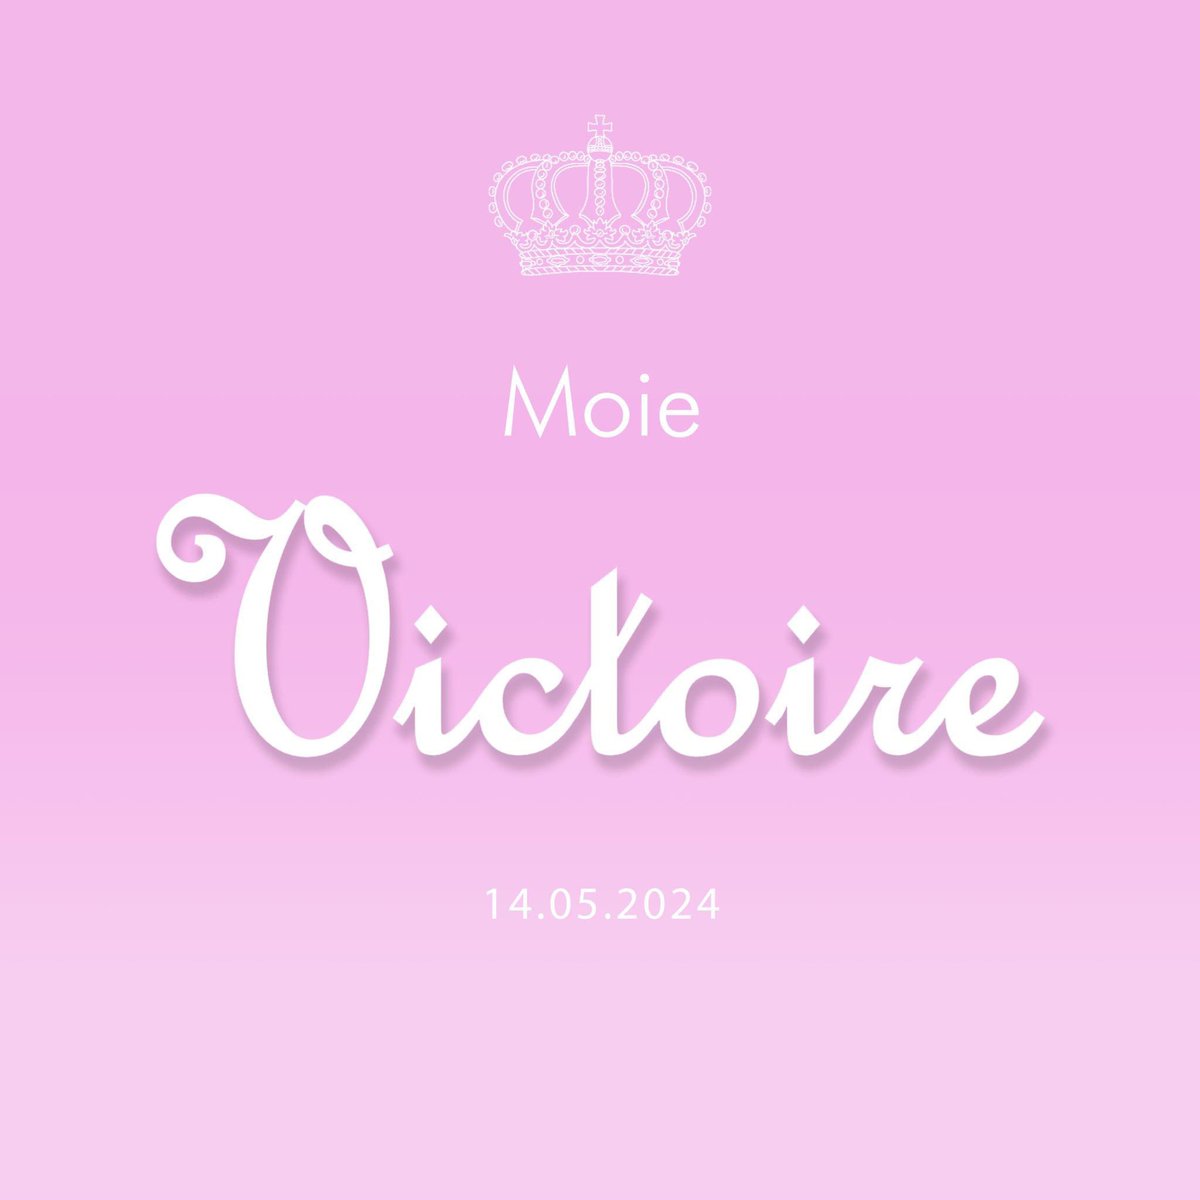 👶🍼 The Grand Duke and Grand Duchess of Luxembourg have announced the birth of their granddaughter Victoire, first child of their daughter Princess Alexandra and their son-in-law Nicolas, born this Tuesday, May 14 in Paris. The mother and child are doing well. #courgrandducale